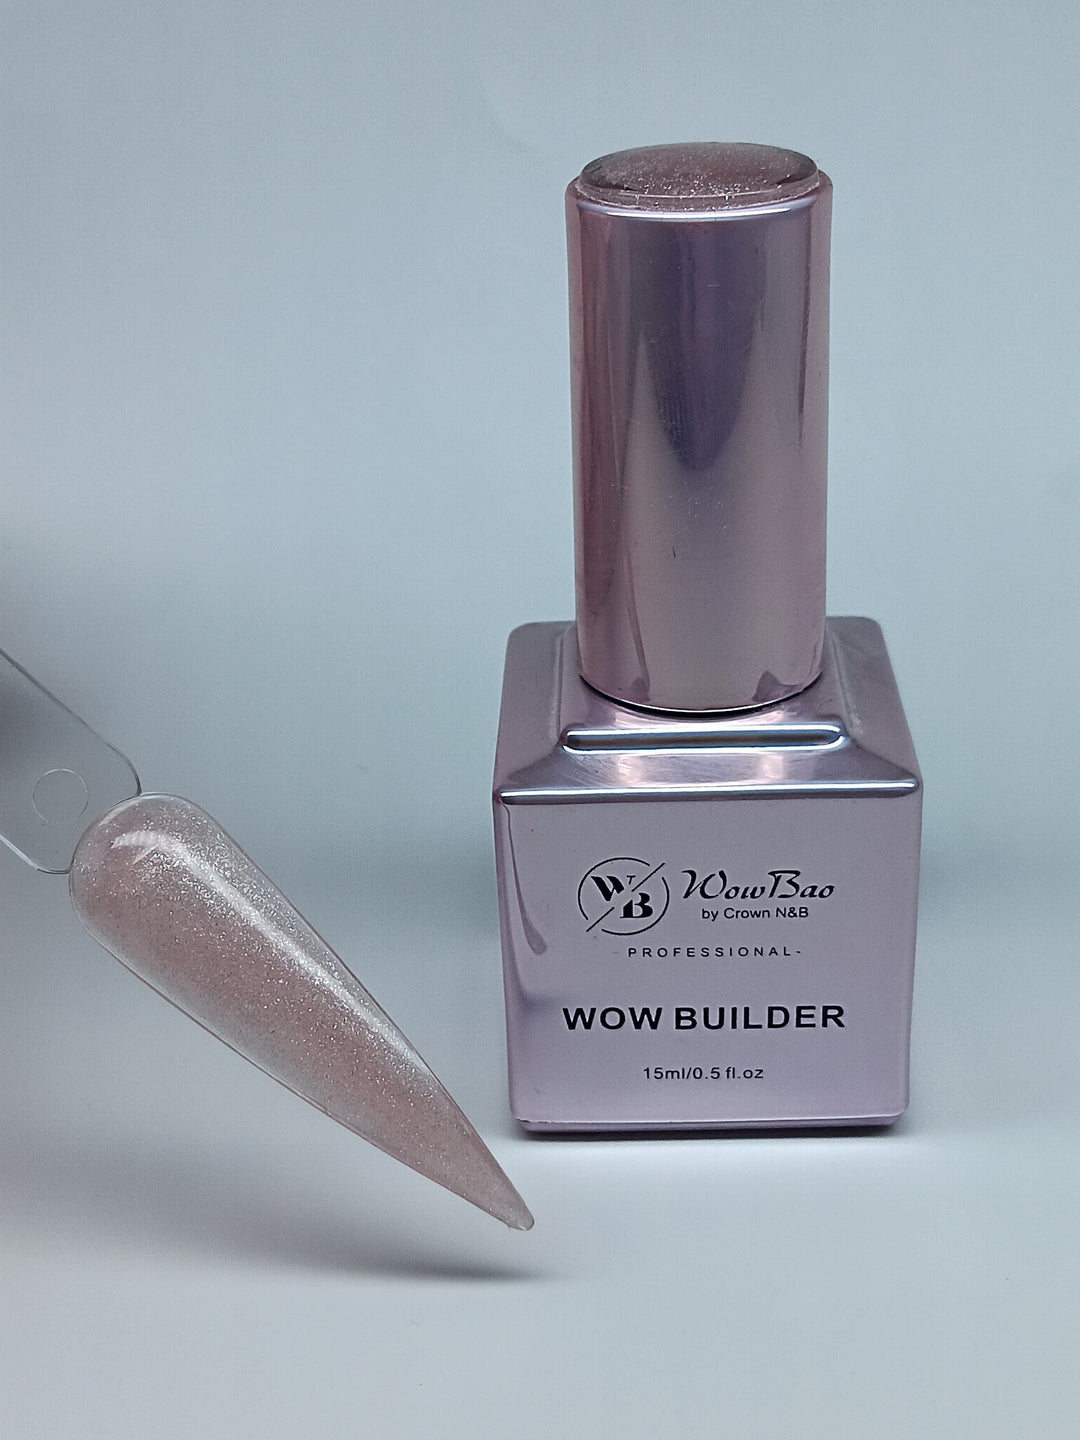 WowBao Nails BIB13 Satin Shimmer WOW brush on Builder in a bottle